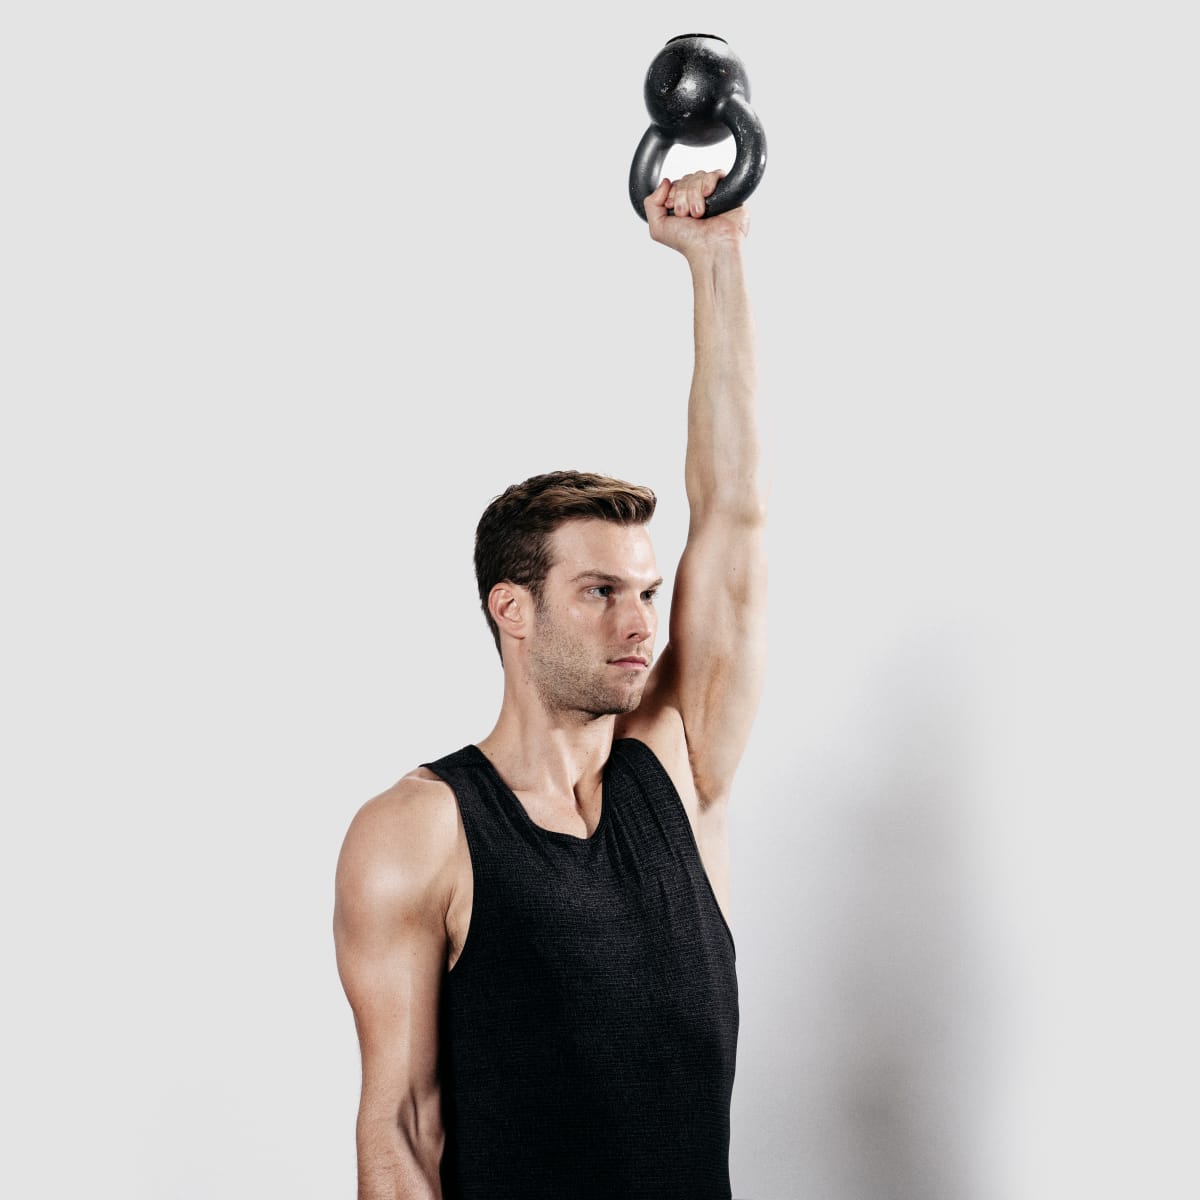 The Kettlebell Workout That Seriously Build - Men's Journal